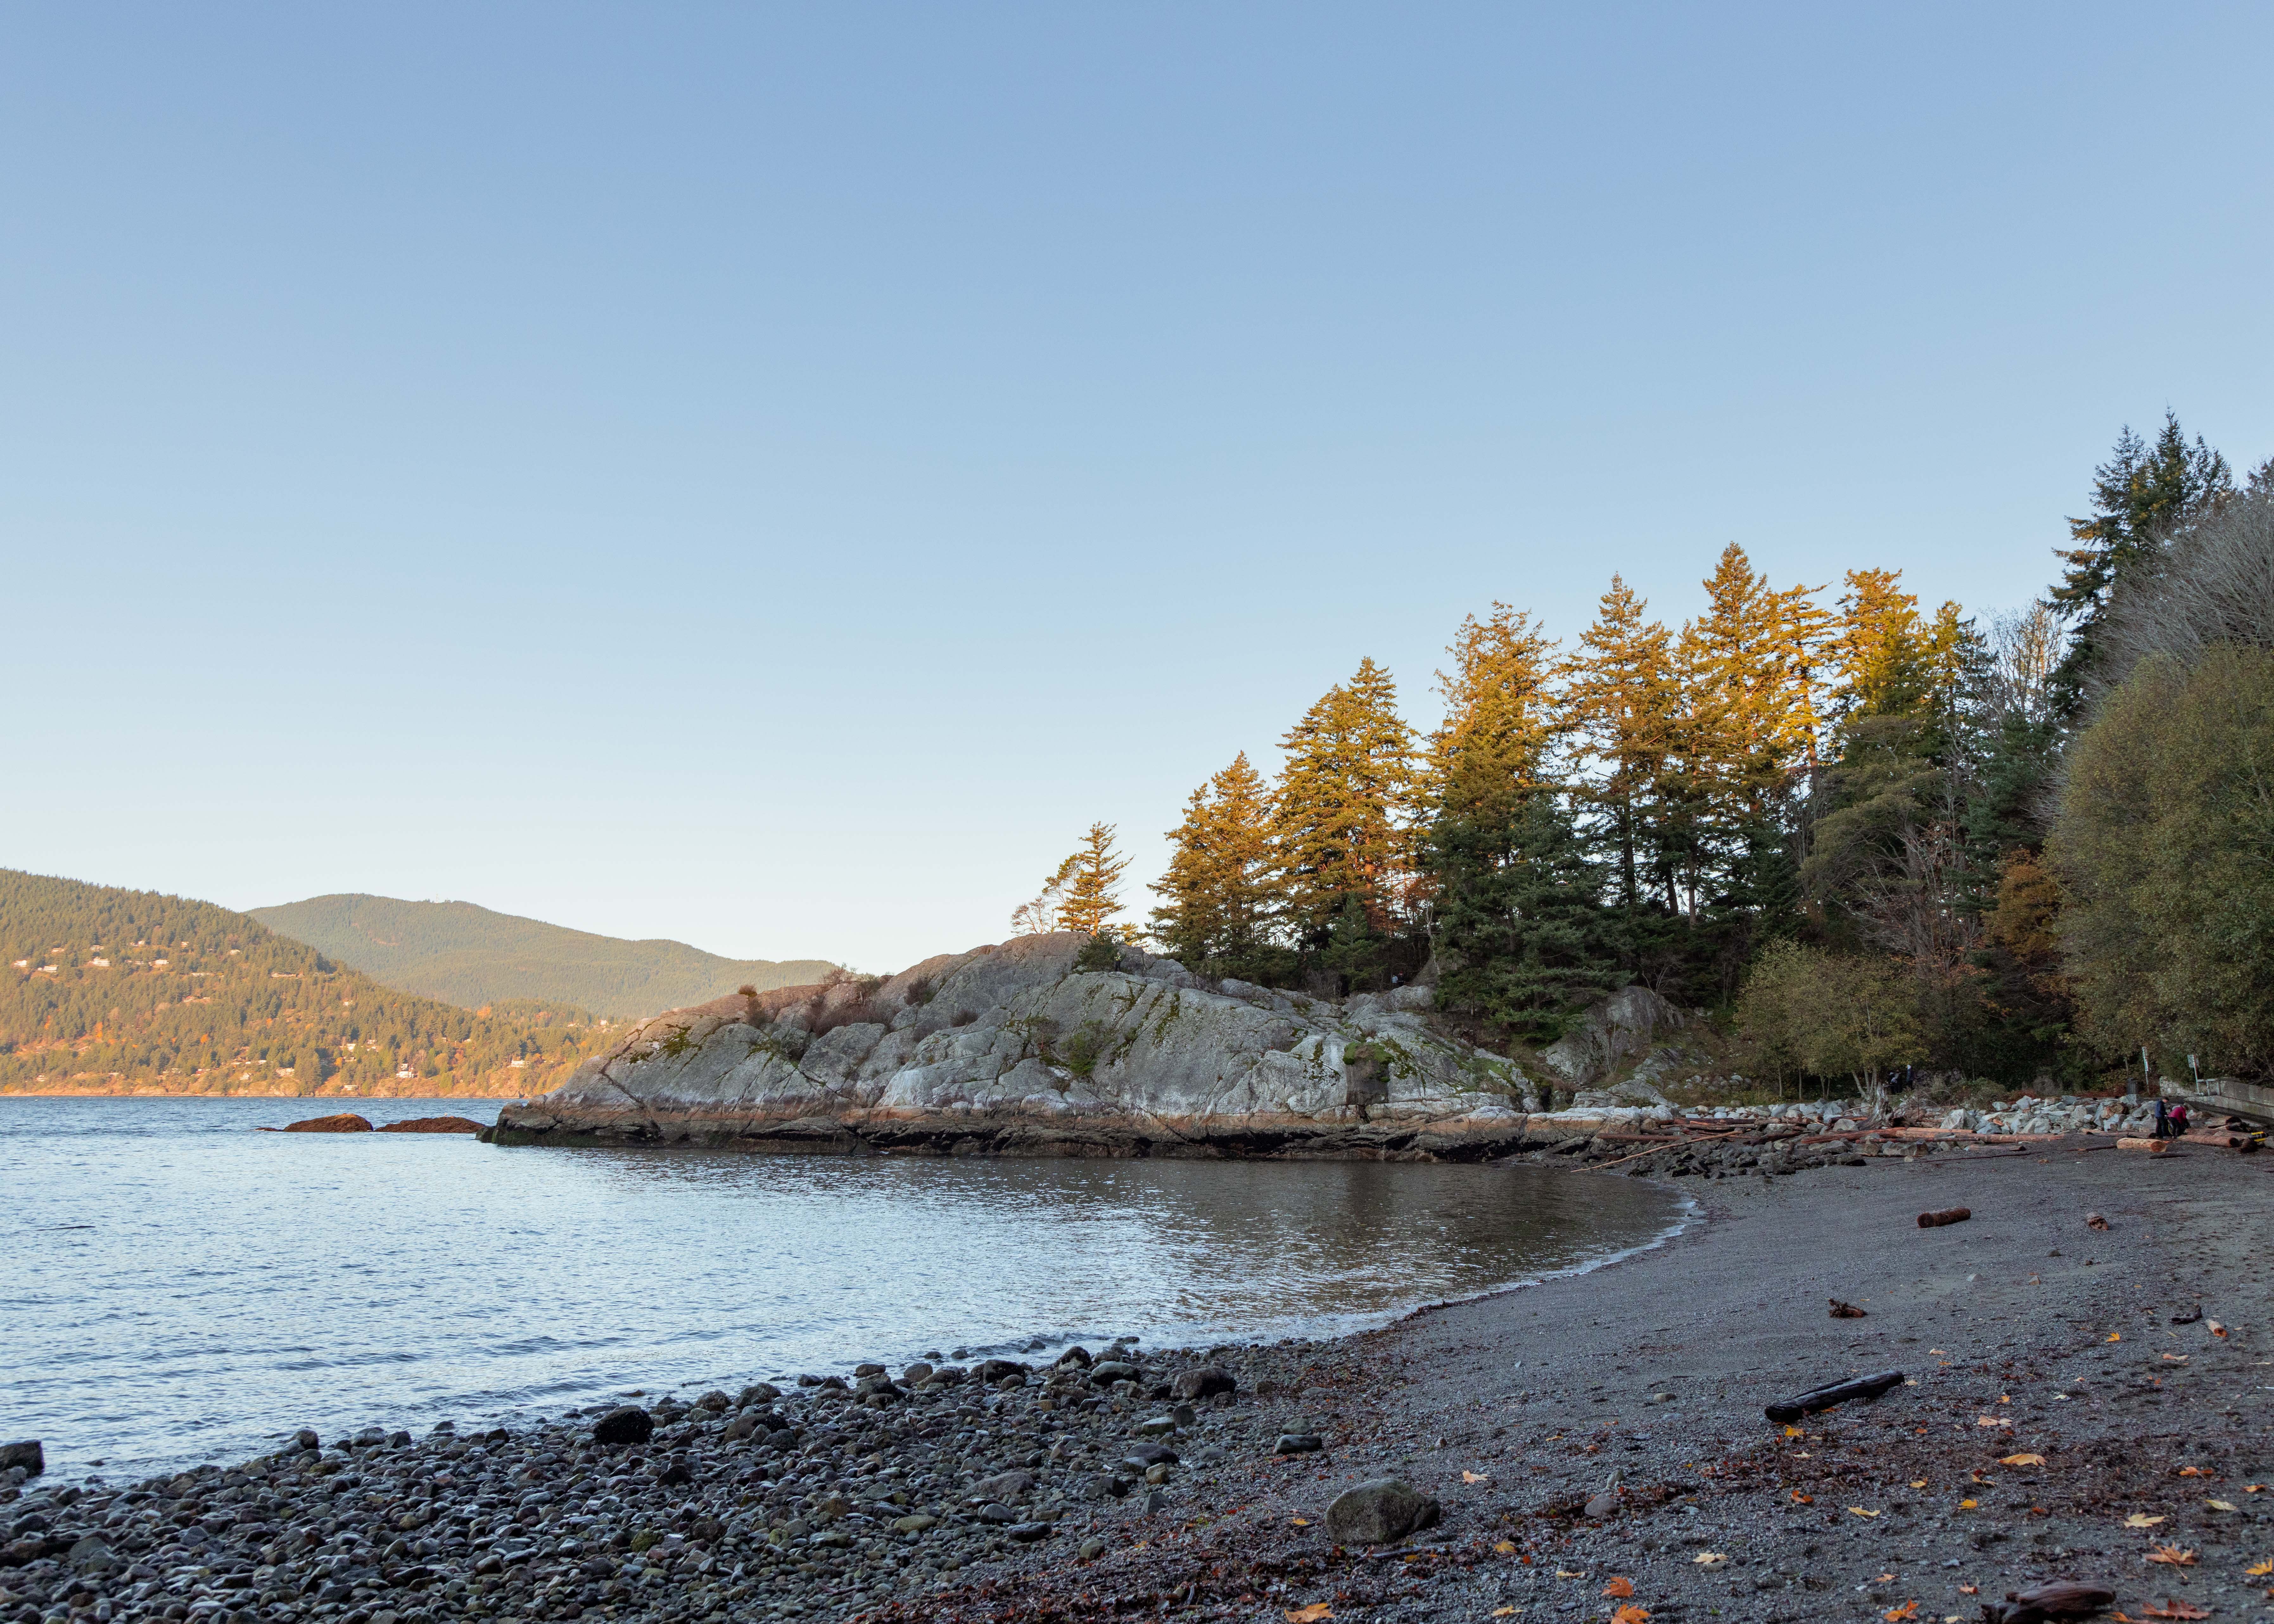 The beaches and shoreline levies at Whytecliff will be crucial in mitigating the effects of sea level rise due to climate change.